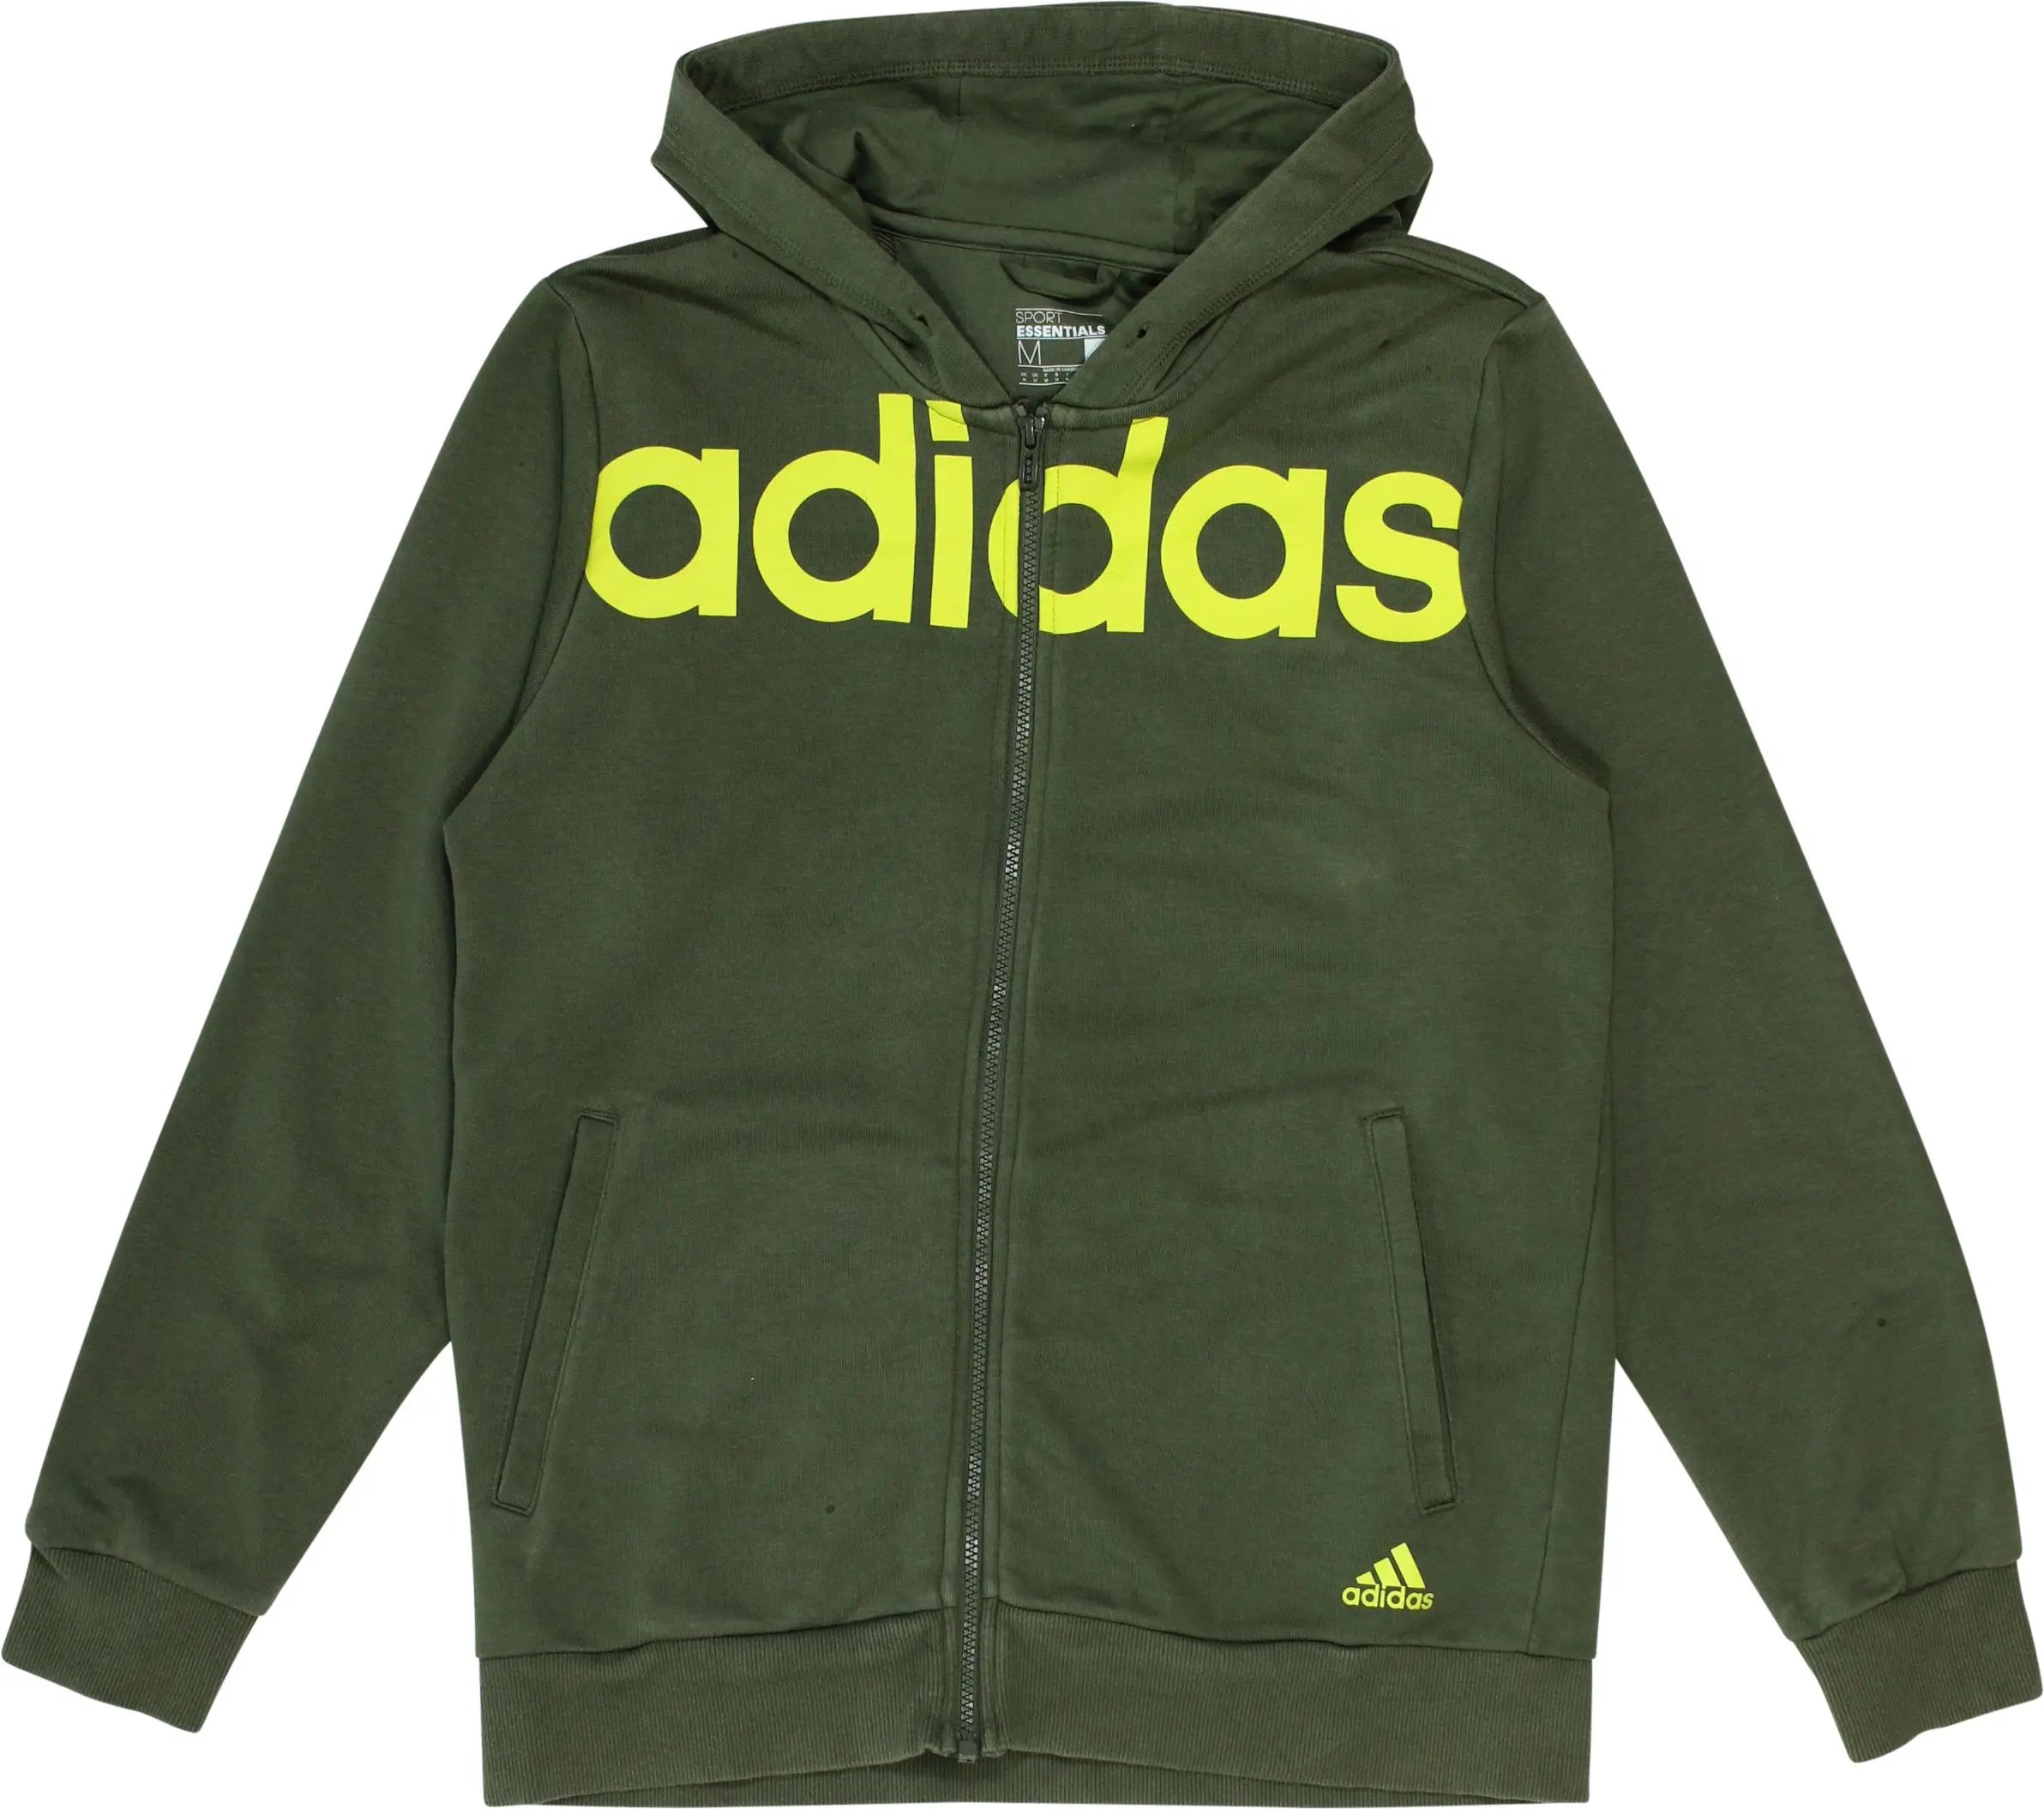 Adidas - Adidas Green Zip Hoodie- ThriftTale.com - Vintage and second handclothing